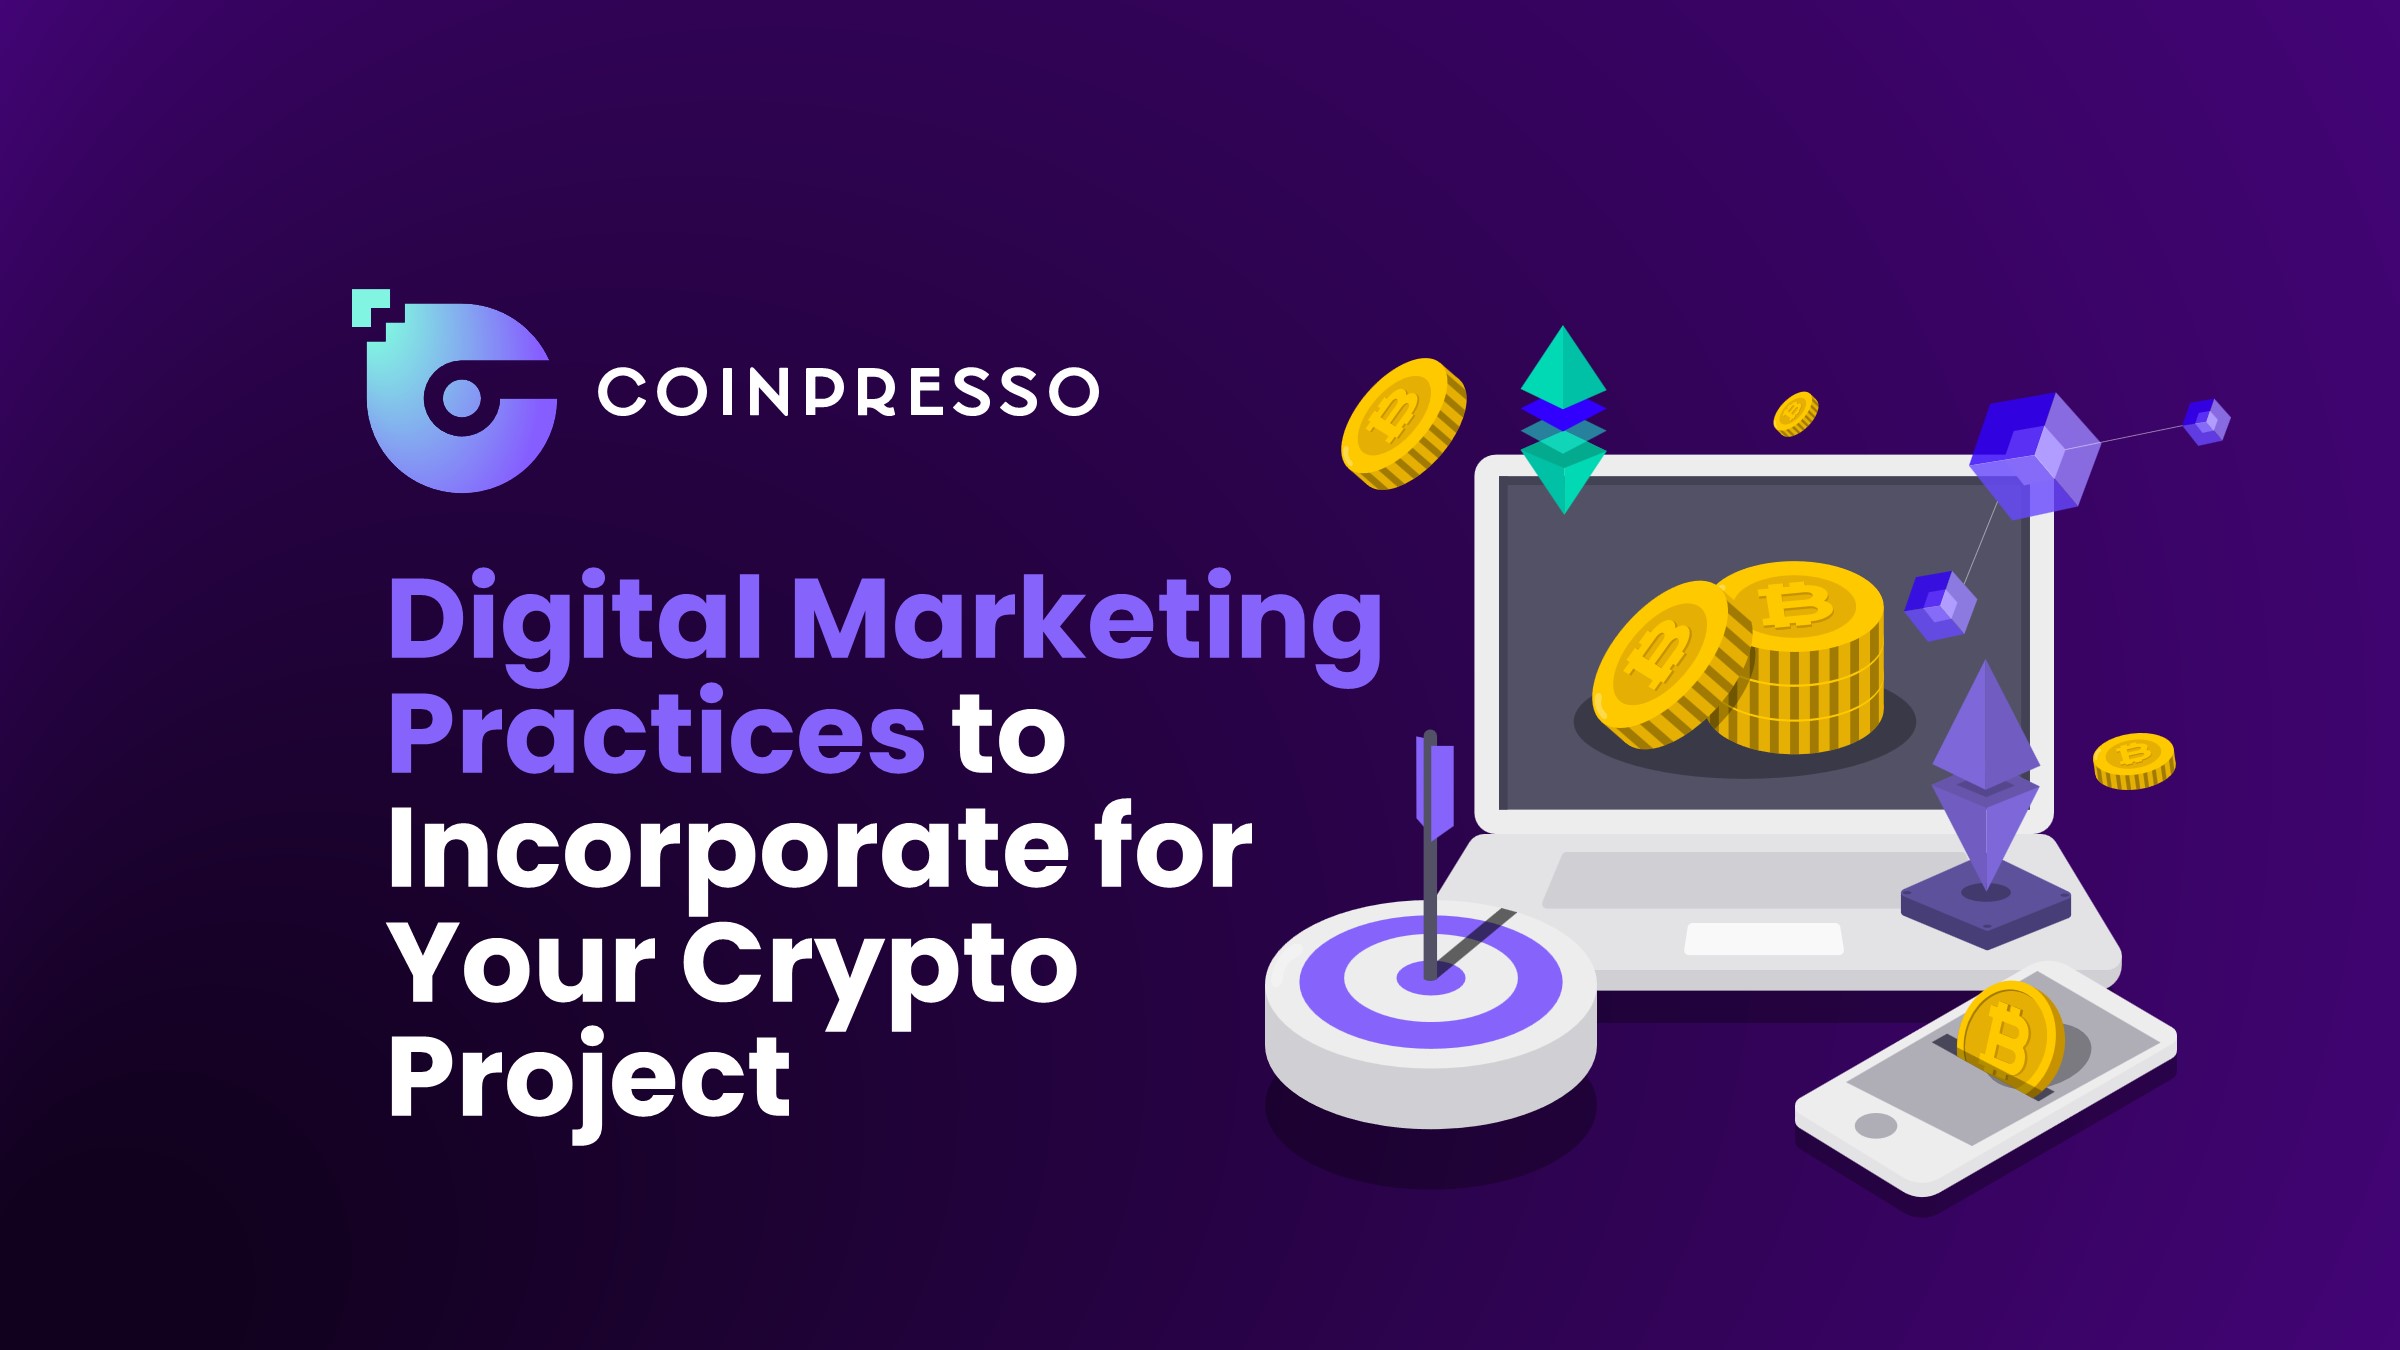 Digital Marketing Practices to Incorporate for Your Crypto Project